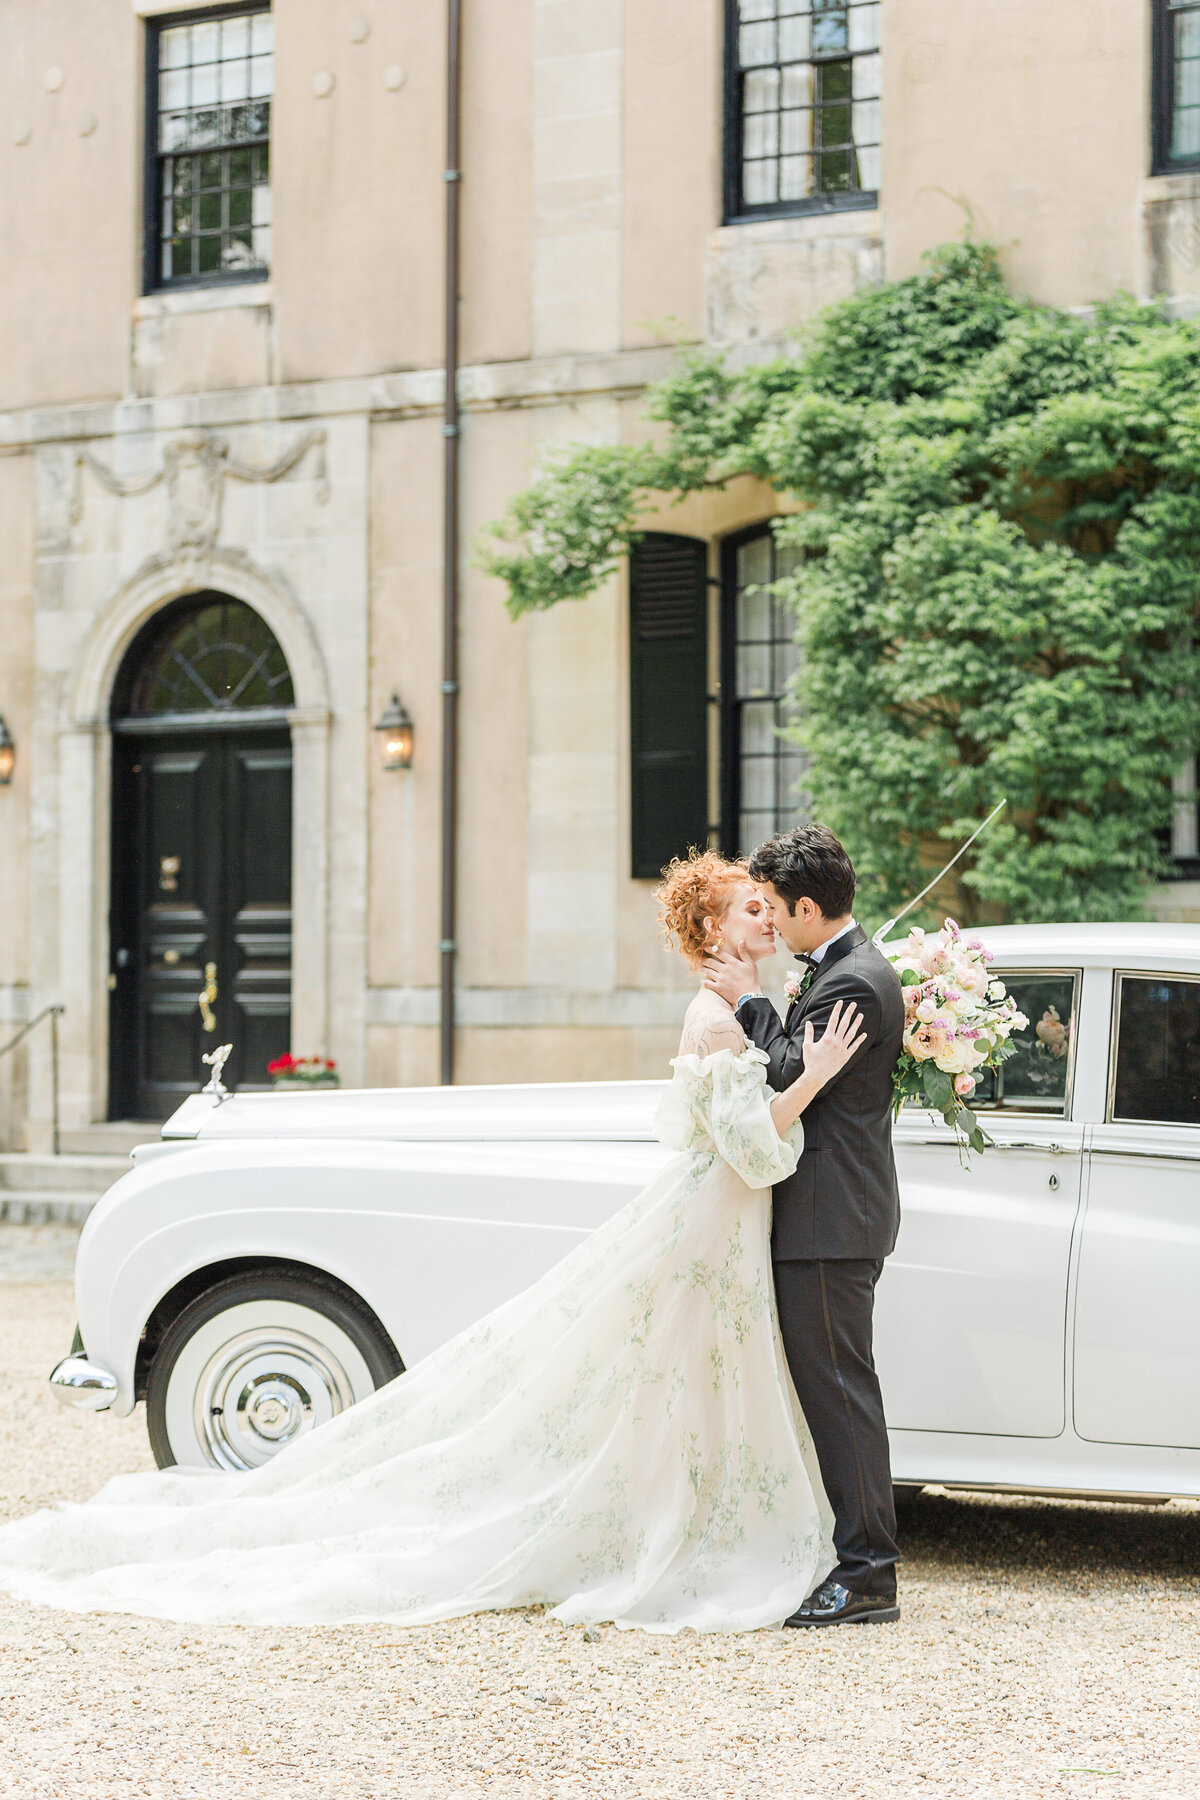 Bride and groom share an intimate kiss at an estate in Boston's North Shore. They are standing in front of a french-inspired mansion and vintage Rolls Royce. Captured by best Massachusetts wedding photographer Lia Rose Weddings